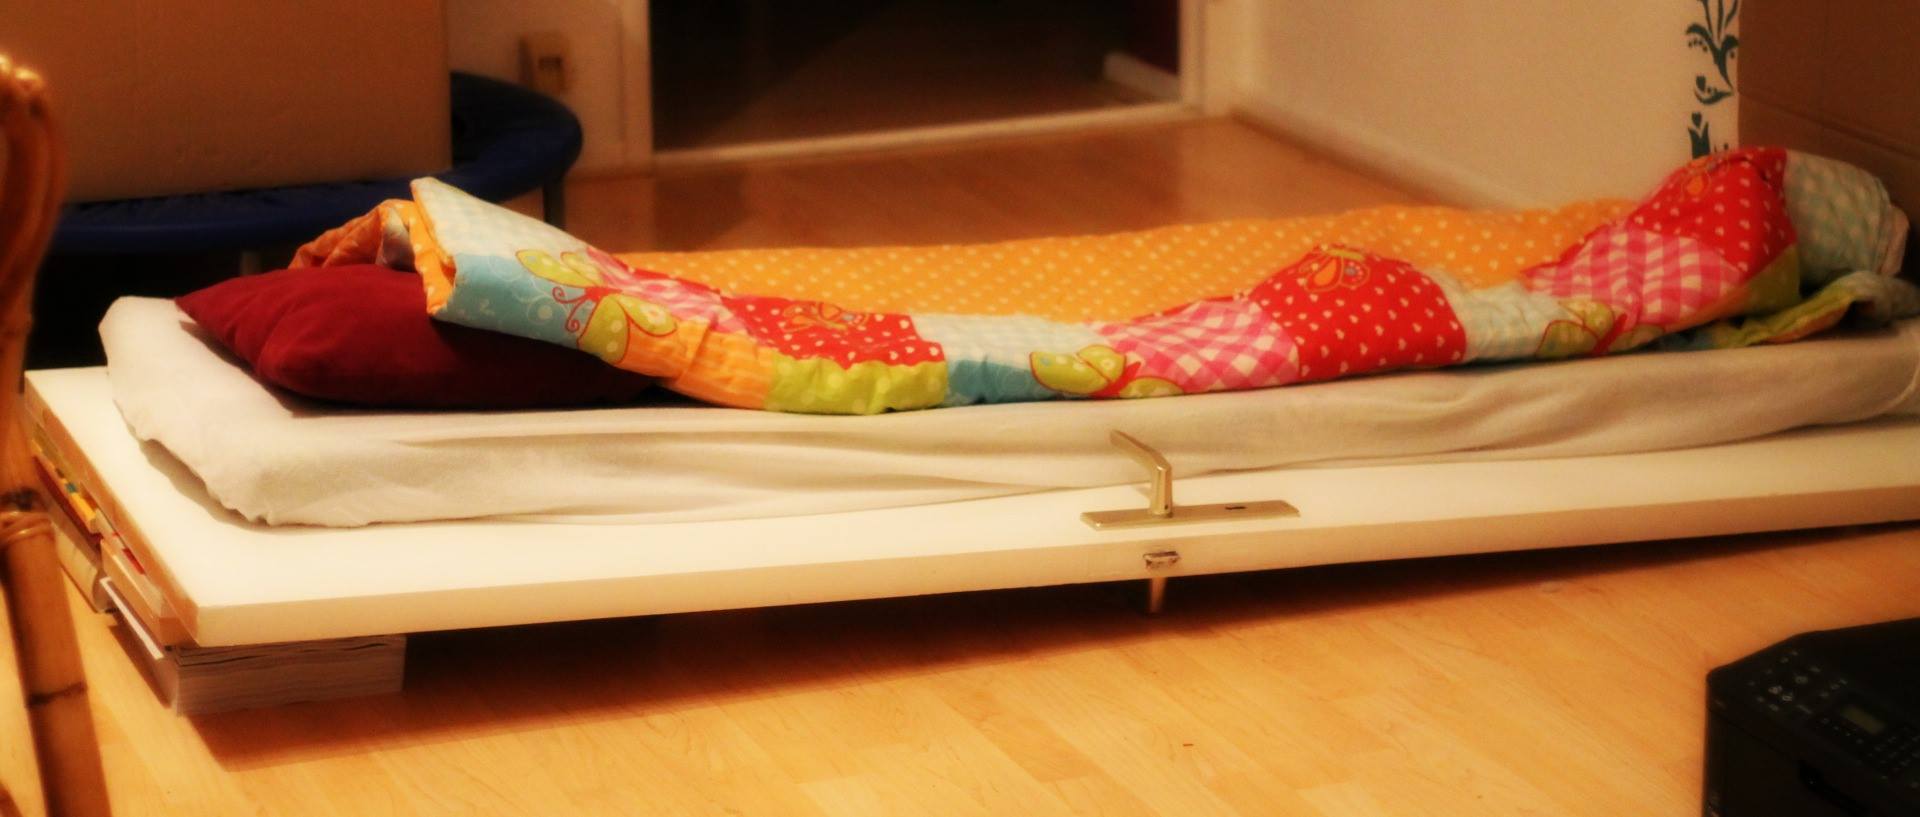 How To Make an Inclined Bed From A Door To Improve Your Sleep and Health